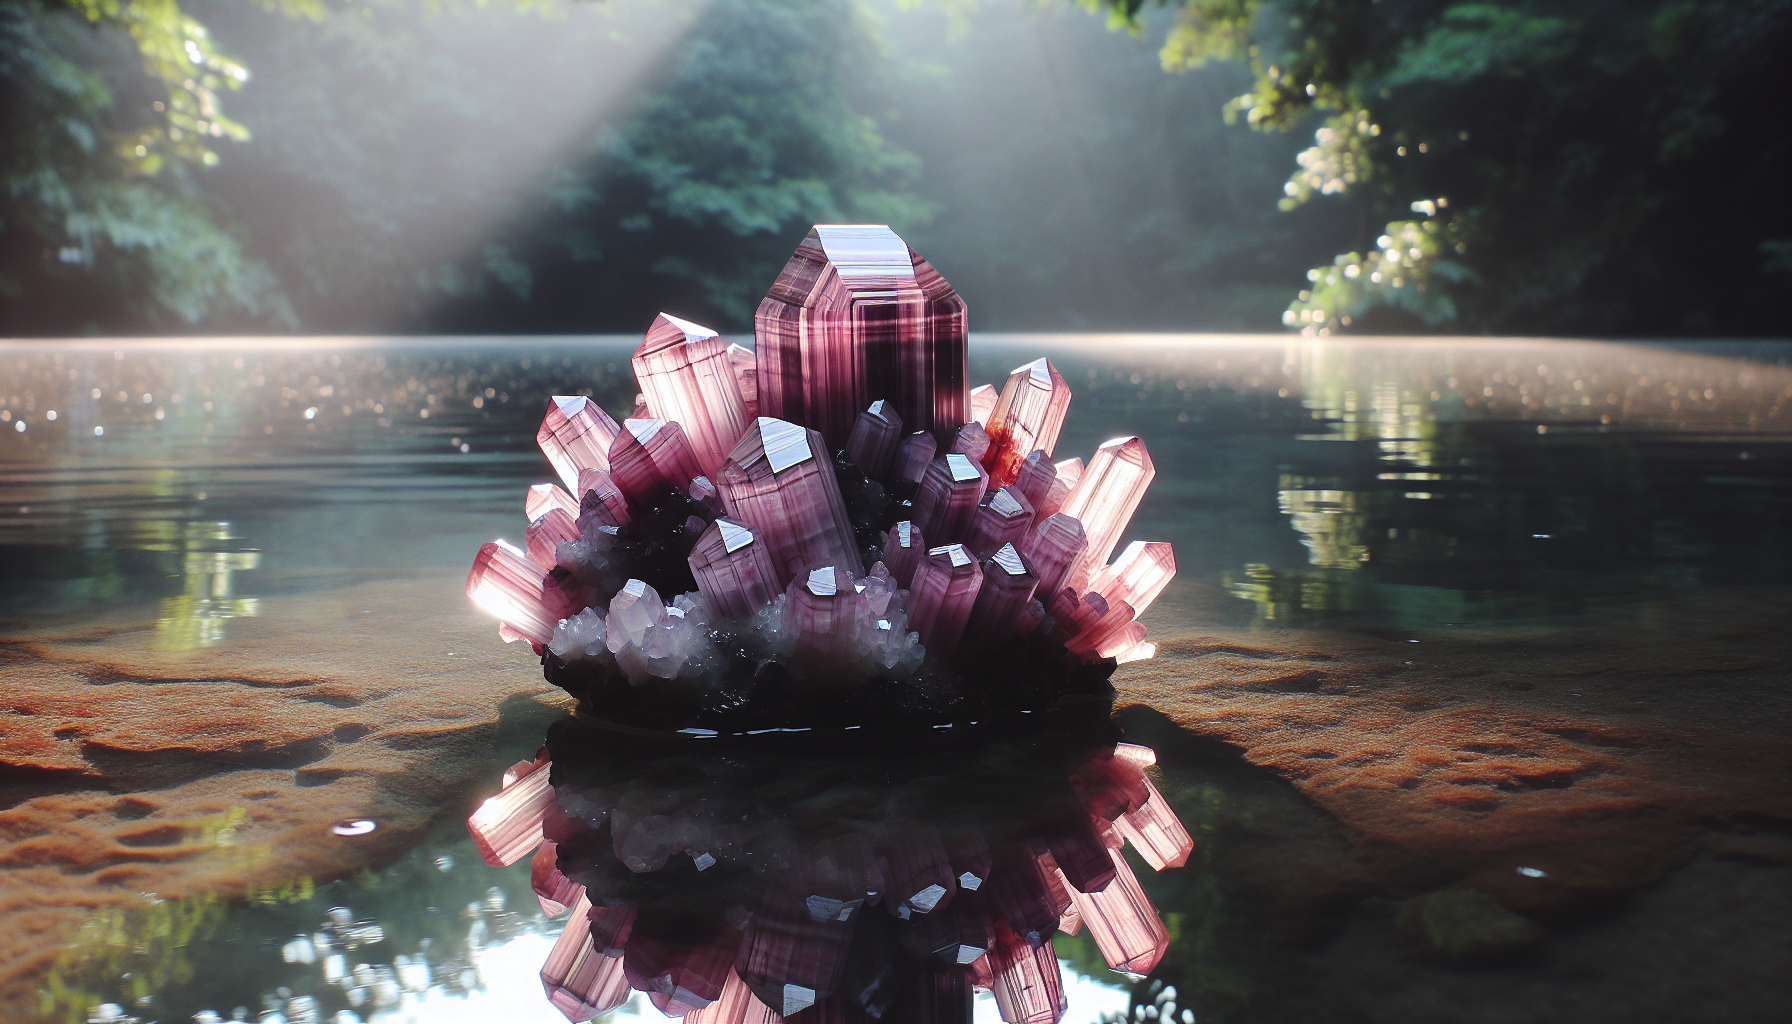 Rhodonite crystals and water